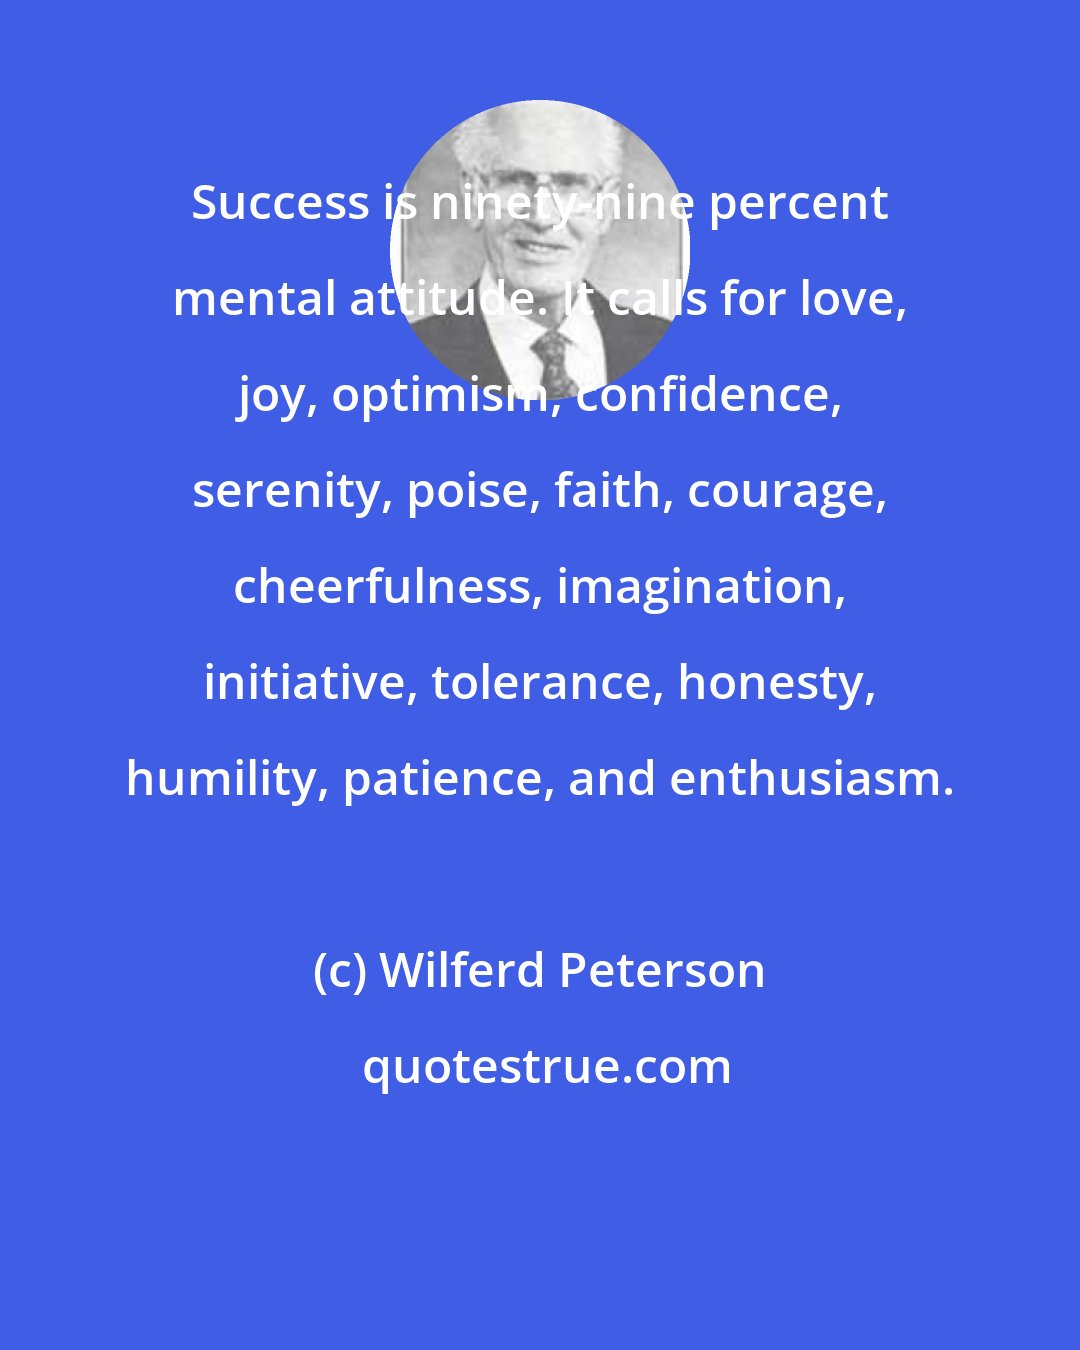 Wilferd Peterson: Success is ninety-nine percent mental attitude. It calls for love, joy, optimism, confidence, serenity, poise, faith, courage, cheerfulness, imagination, initiative, tolerance, honesty, humility, patience, and enthusiasm.